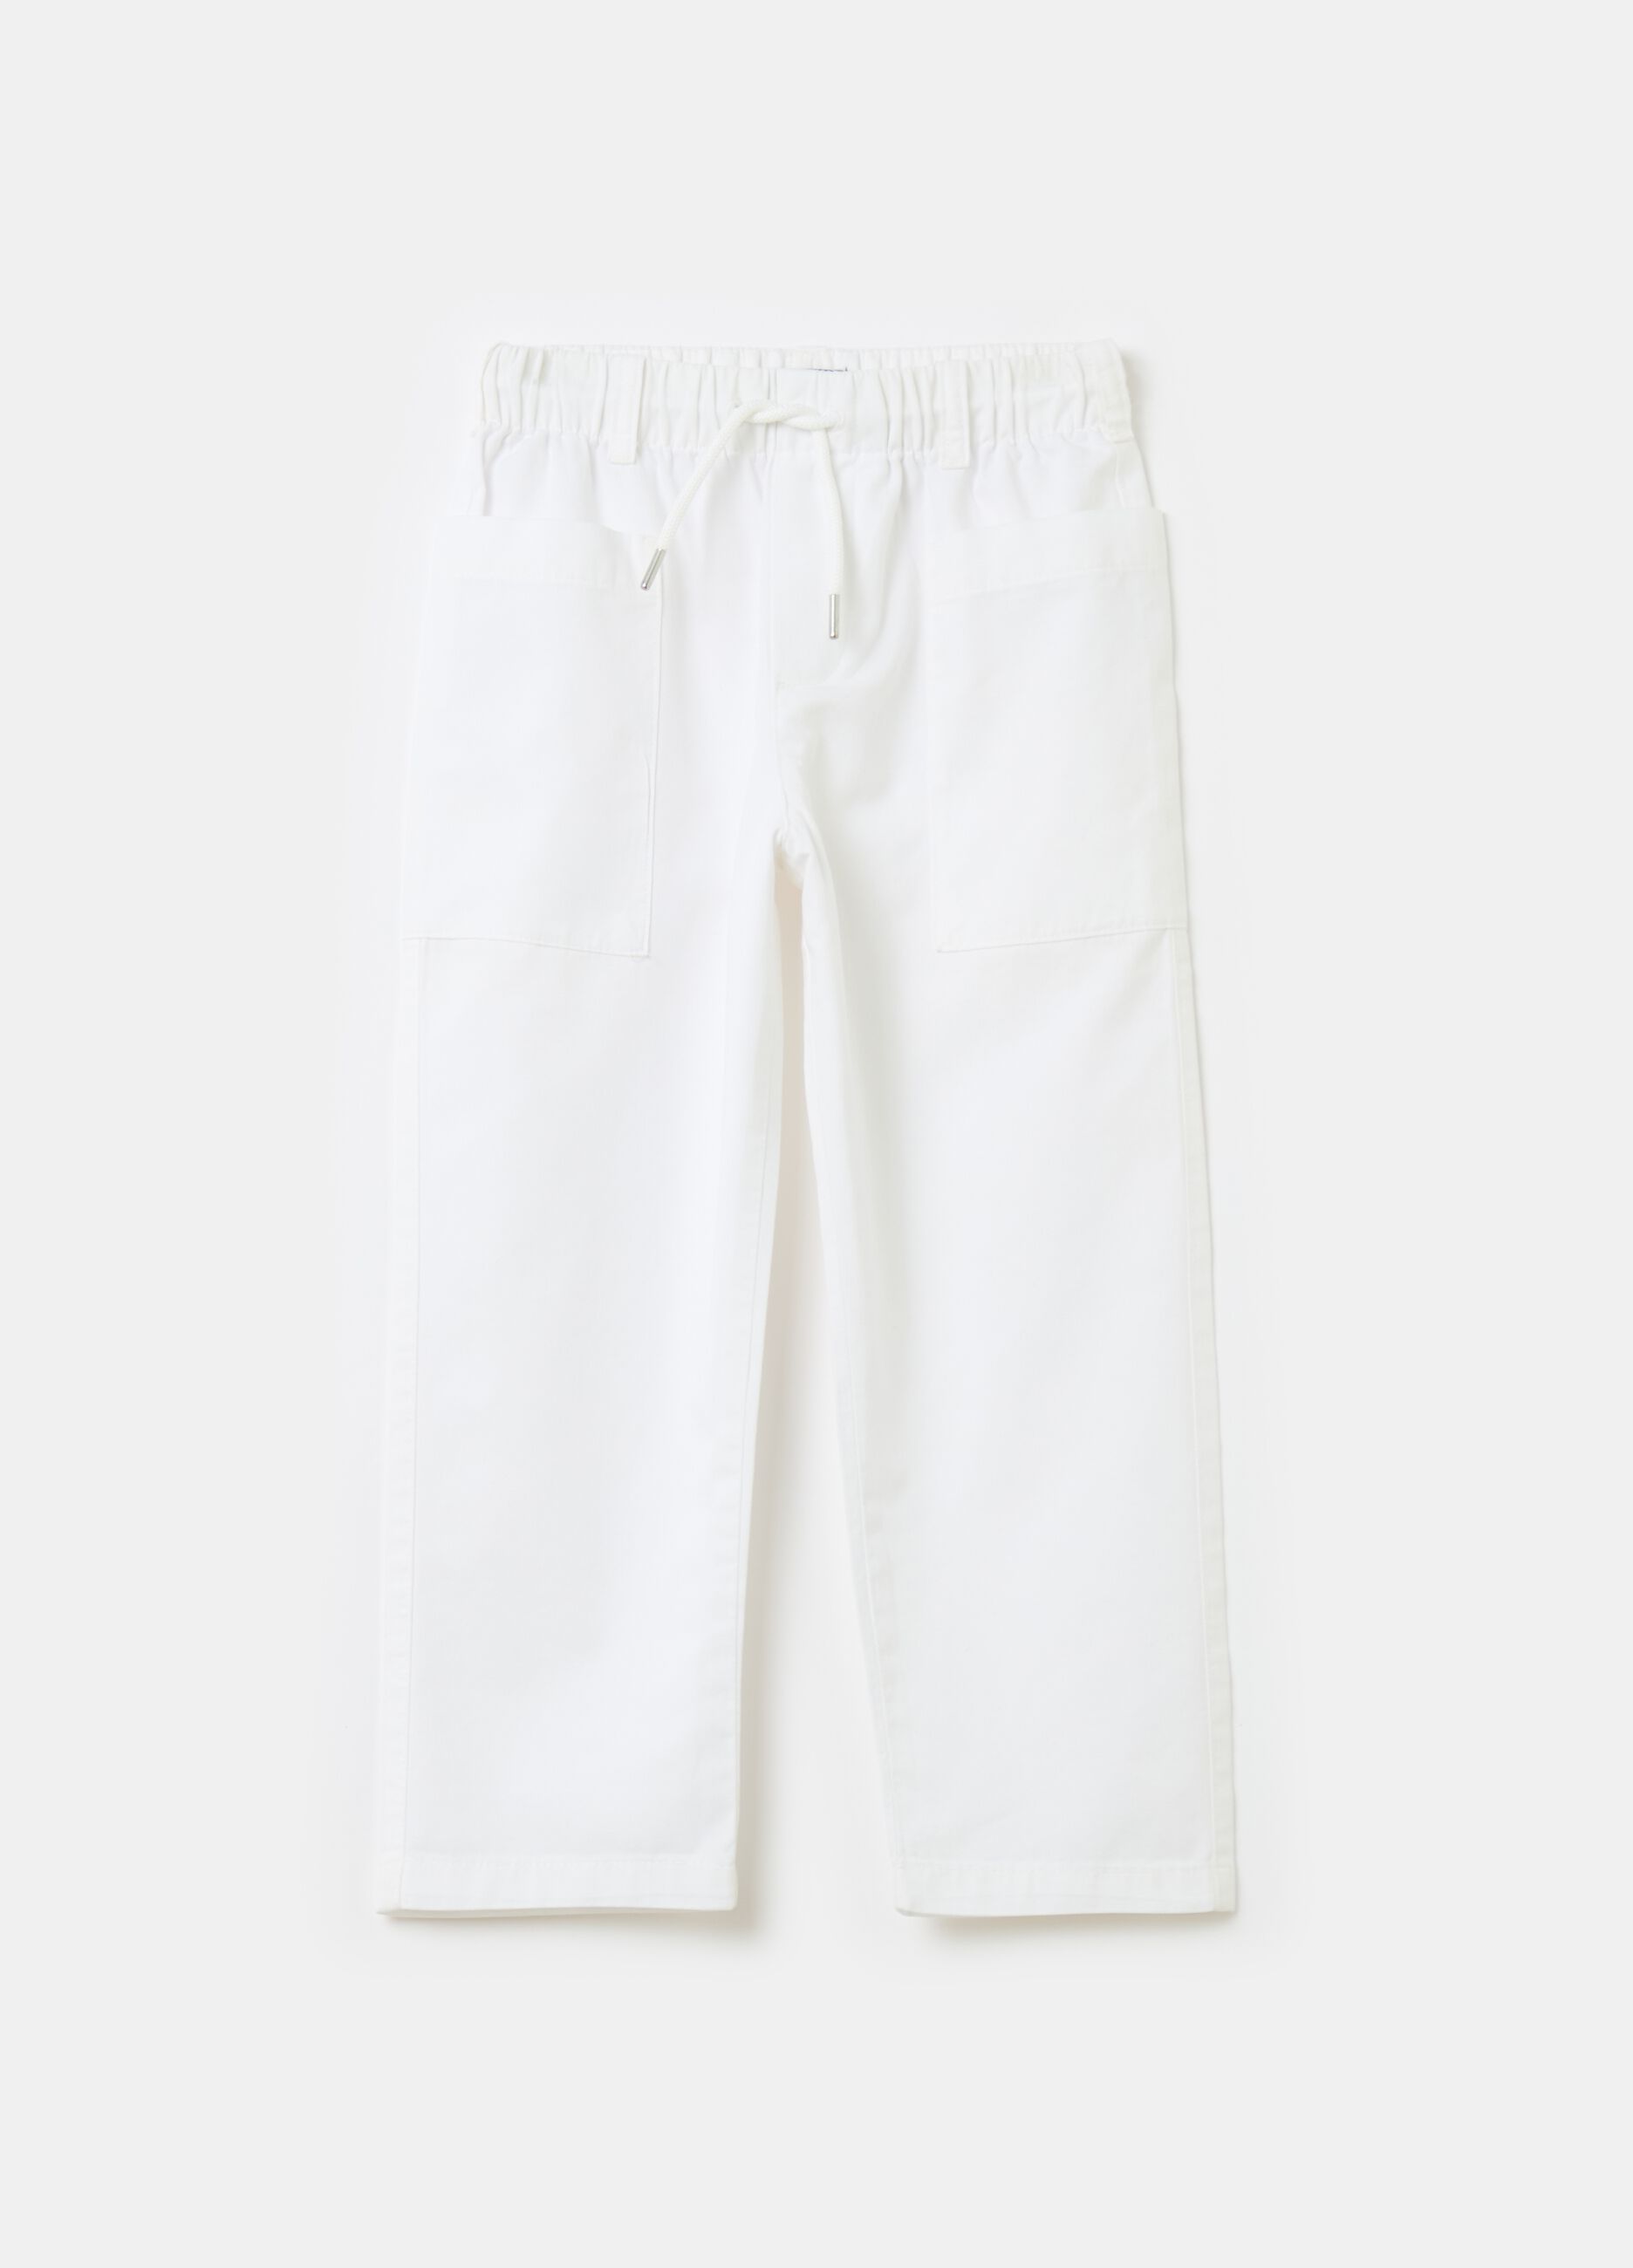 Linen and cotton trousers with drawstring